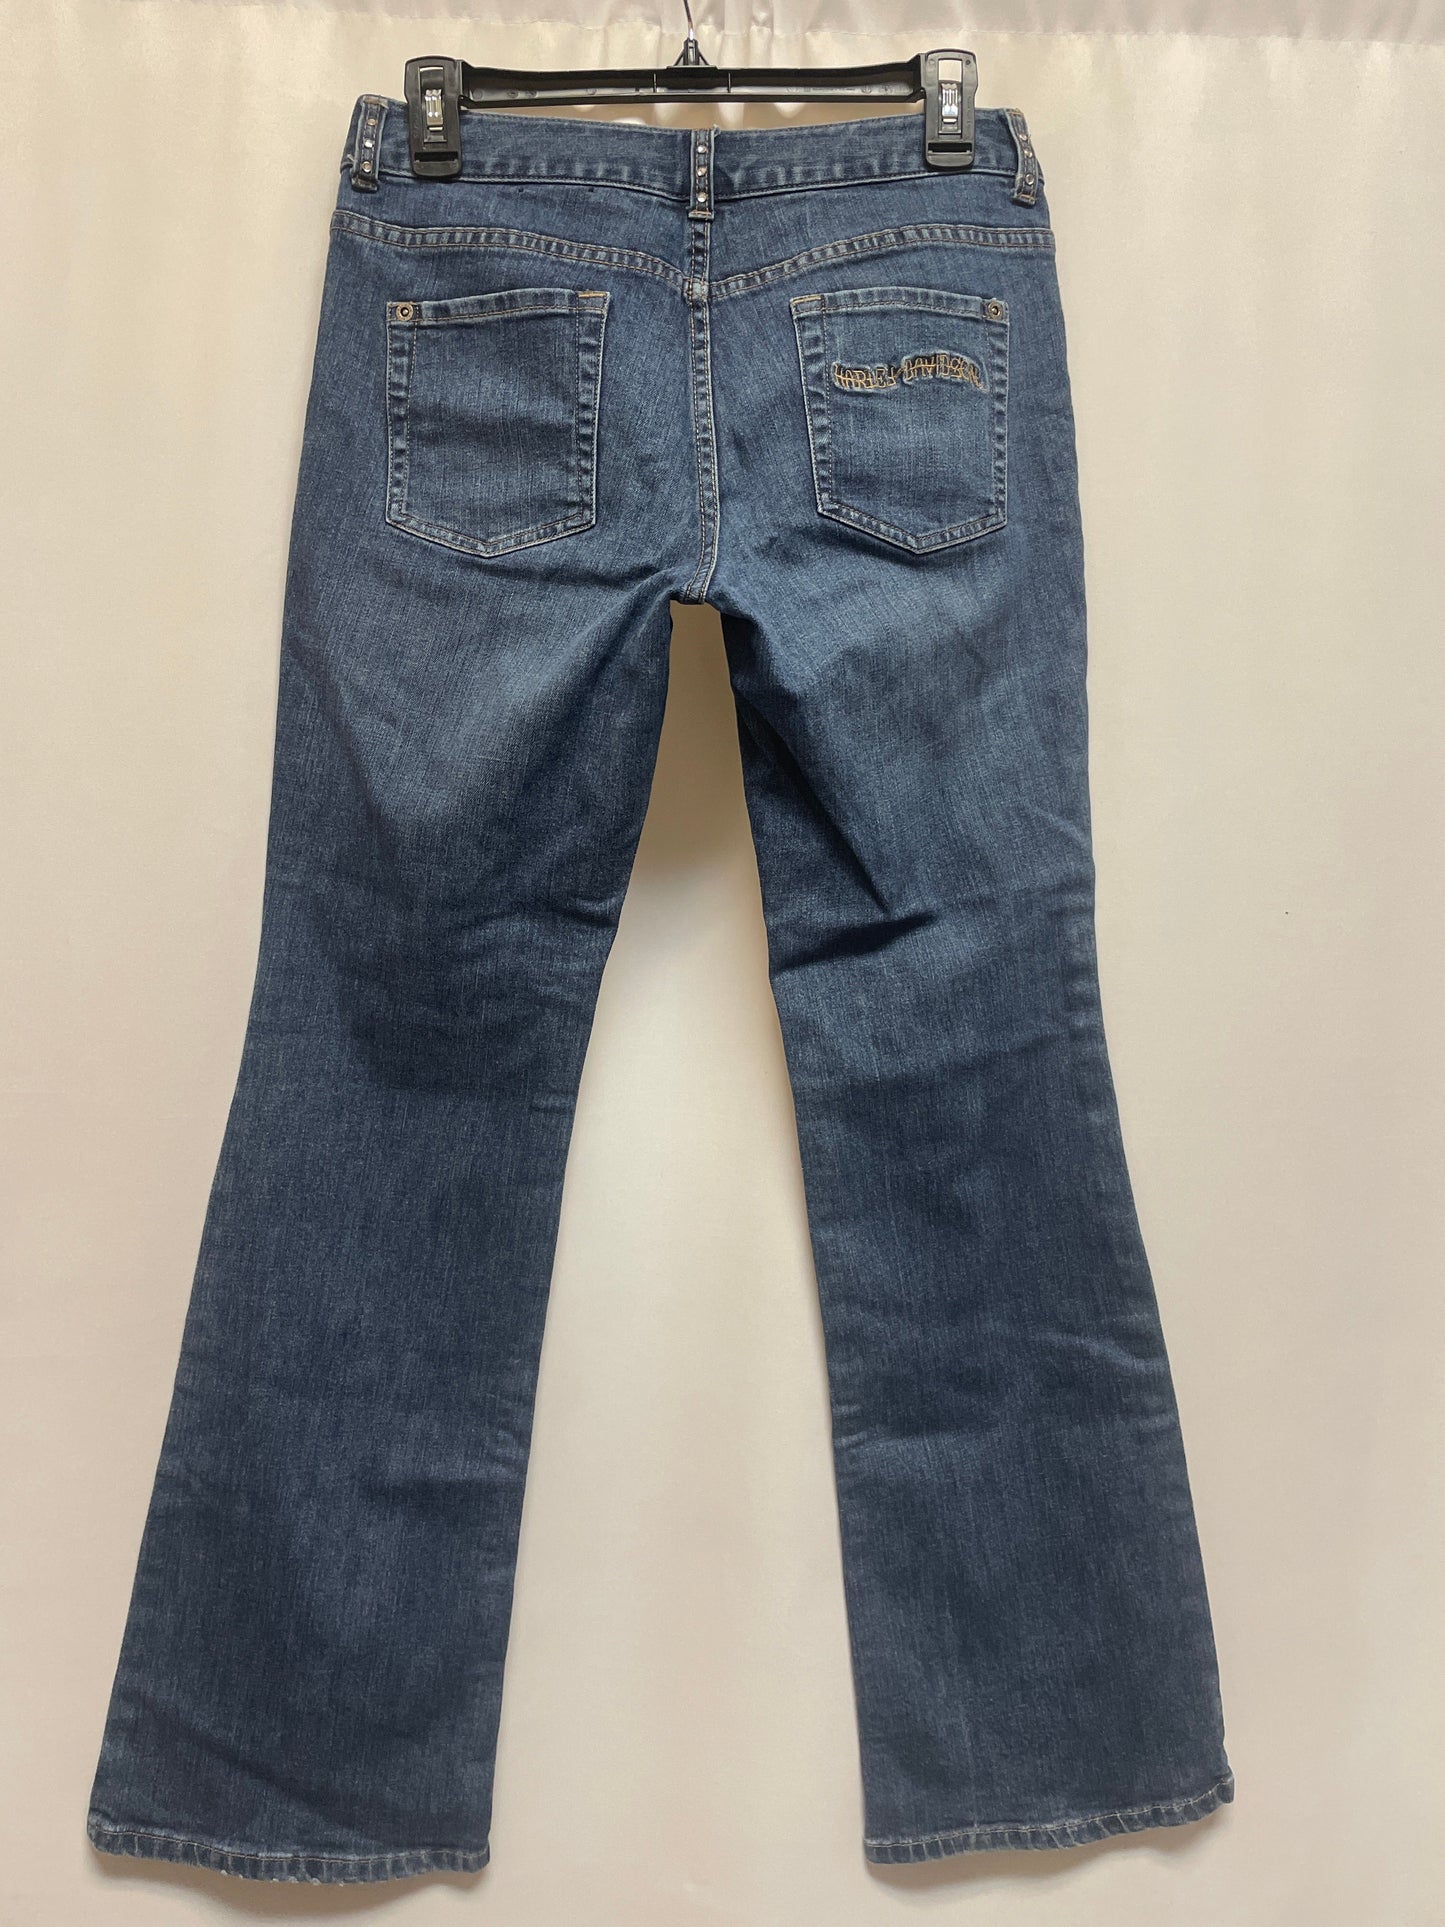 Jeans Boot Cut By Harley Davidson  Size: 6